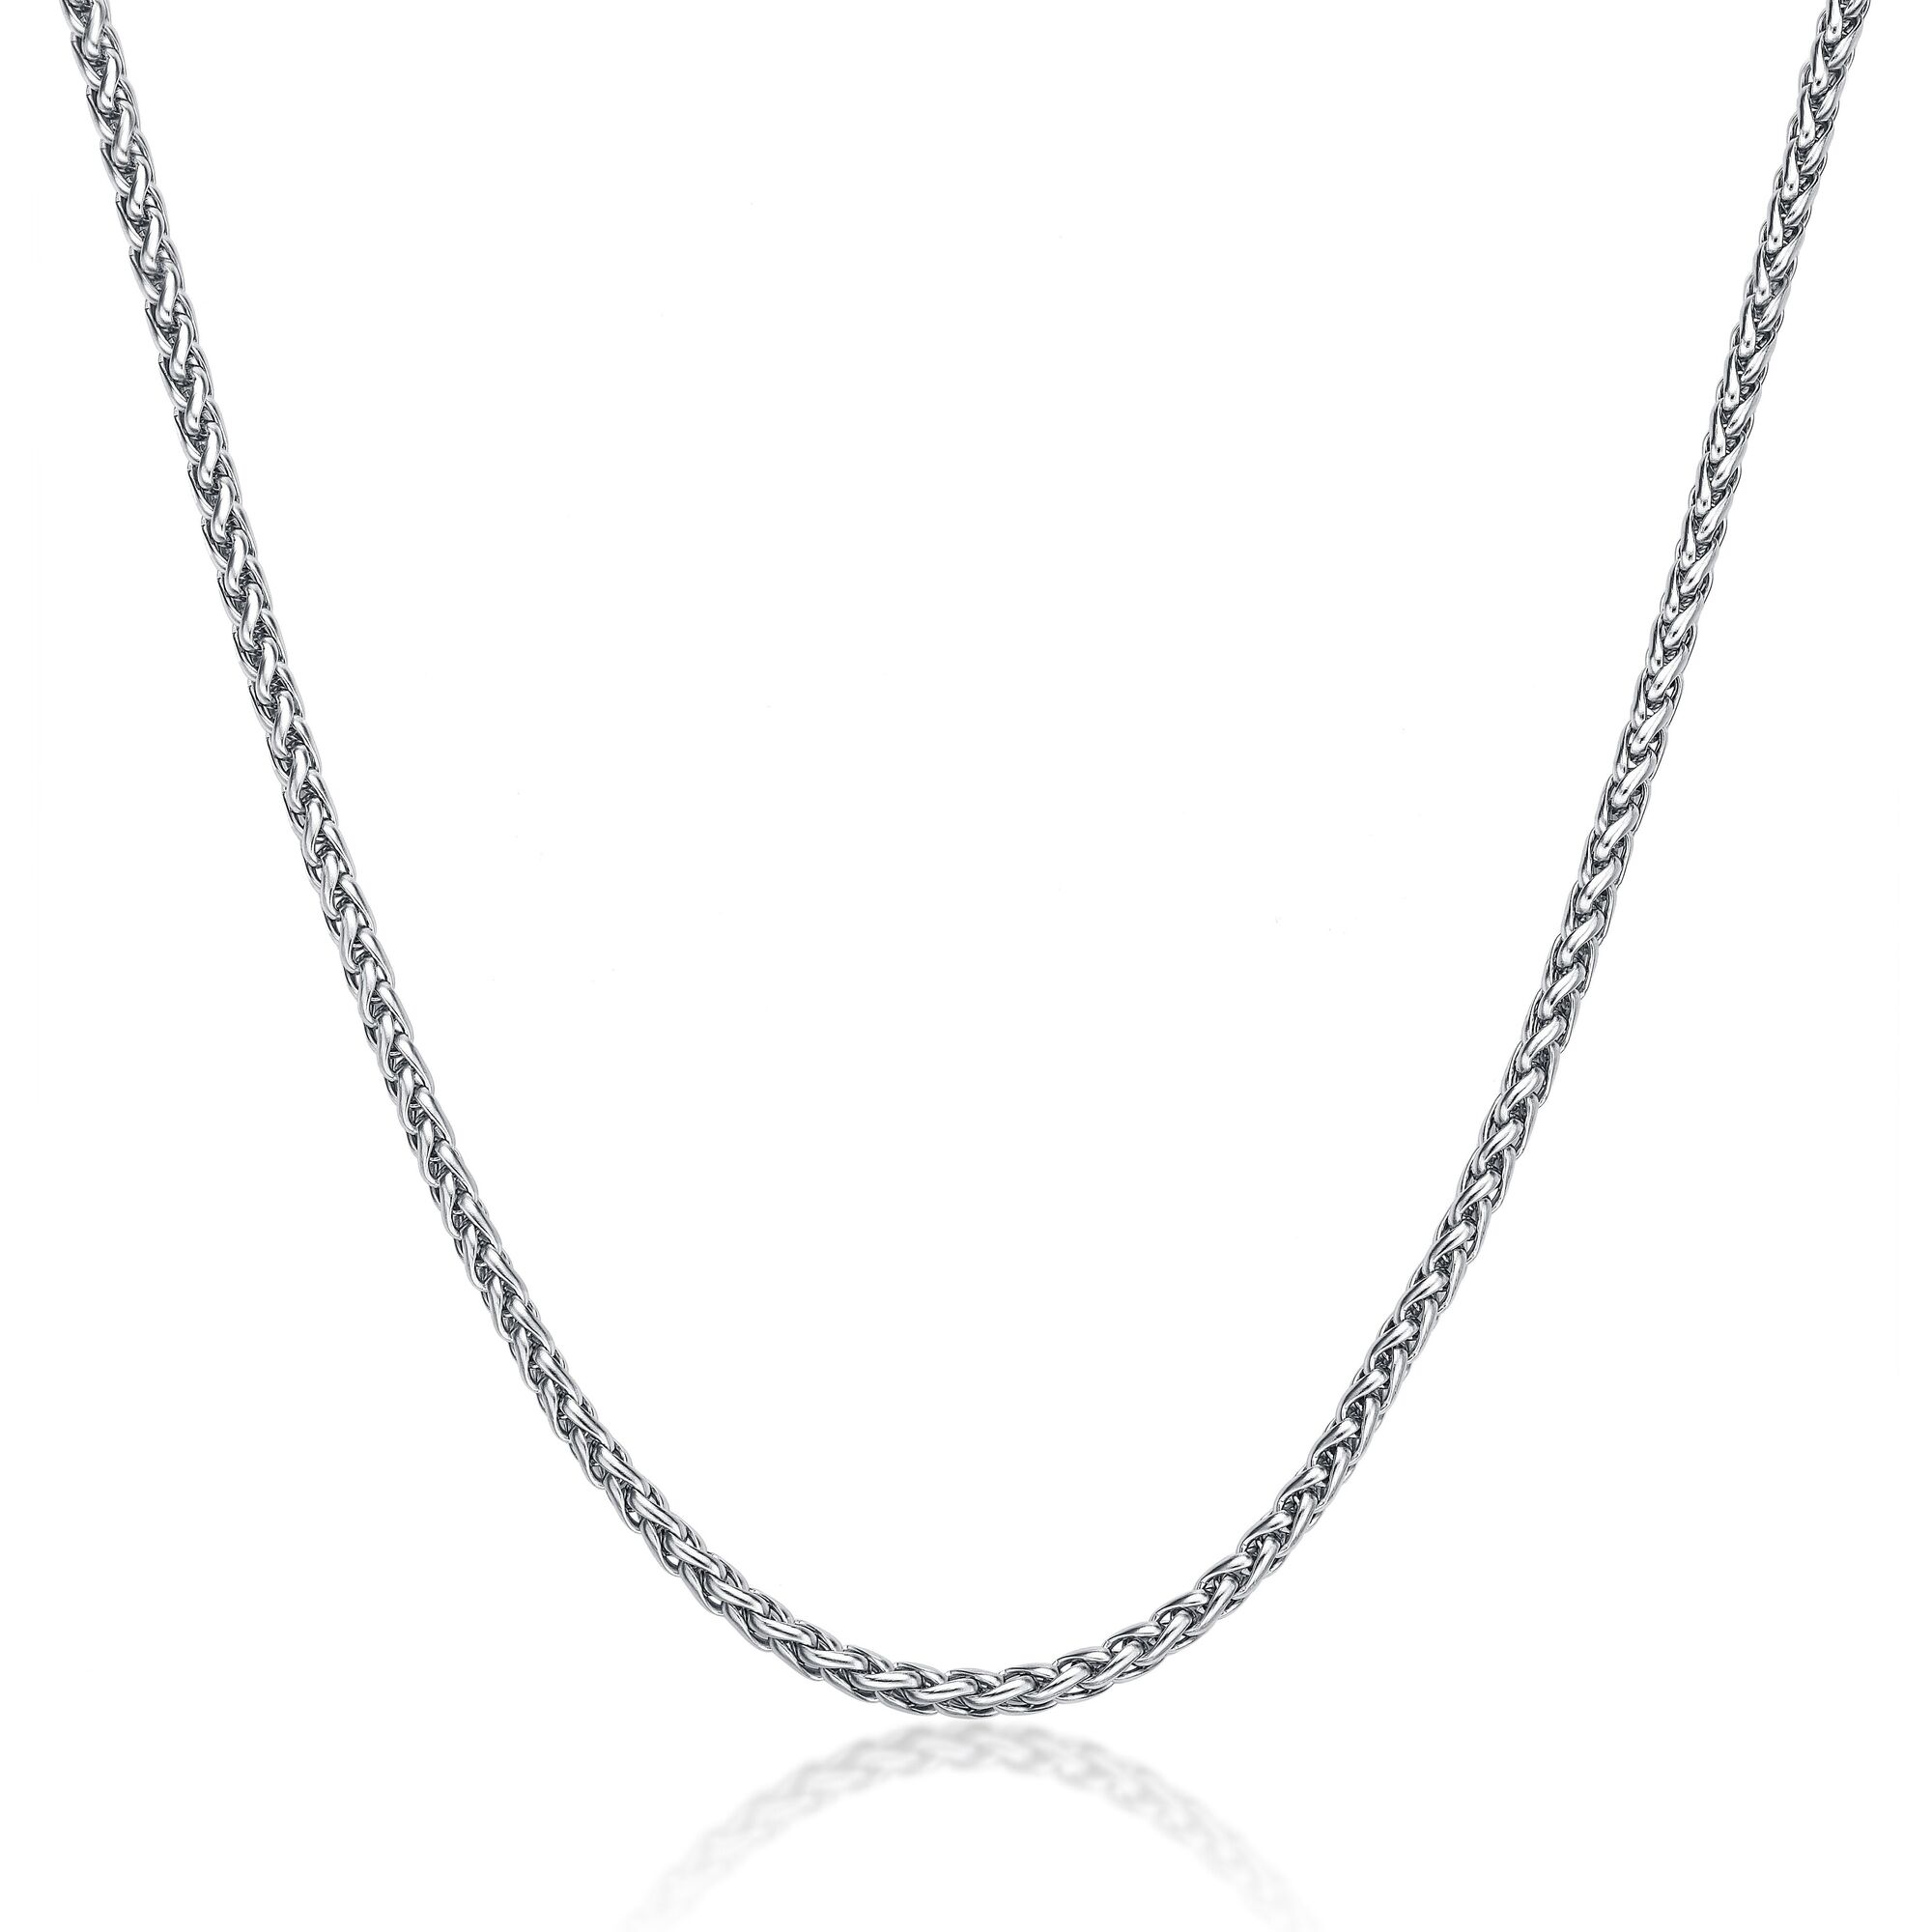 46108-necklace-default-collection-stainless-steel-1-3.jpg